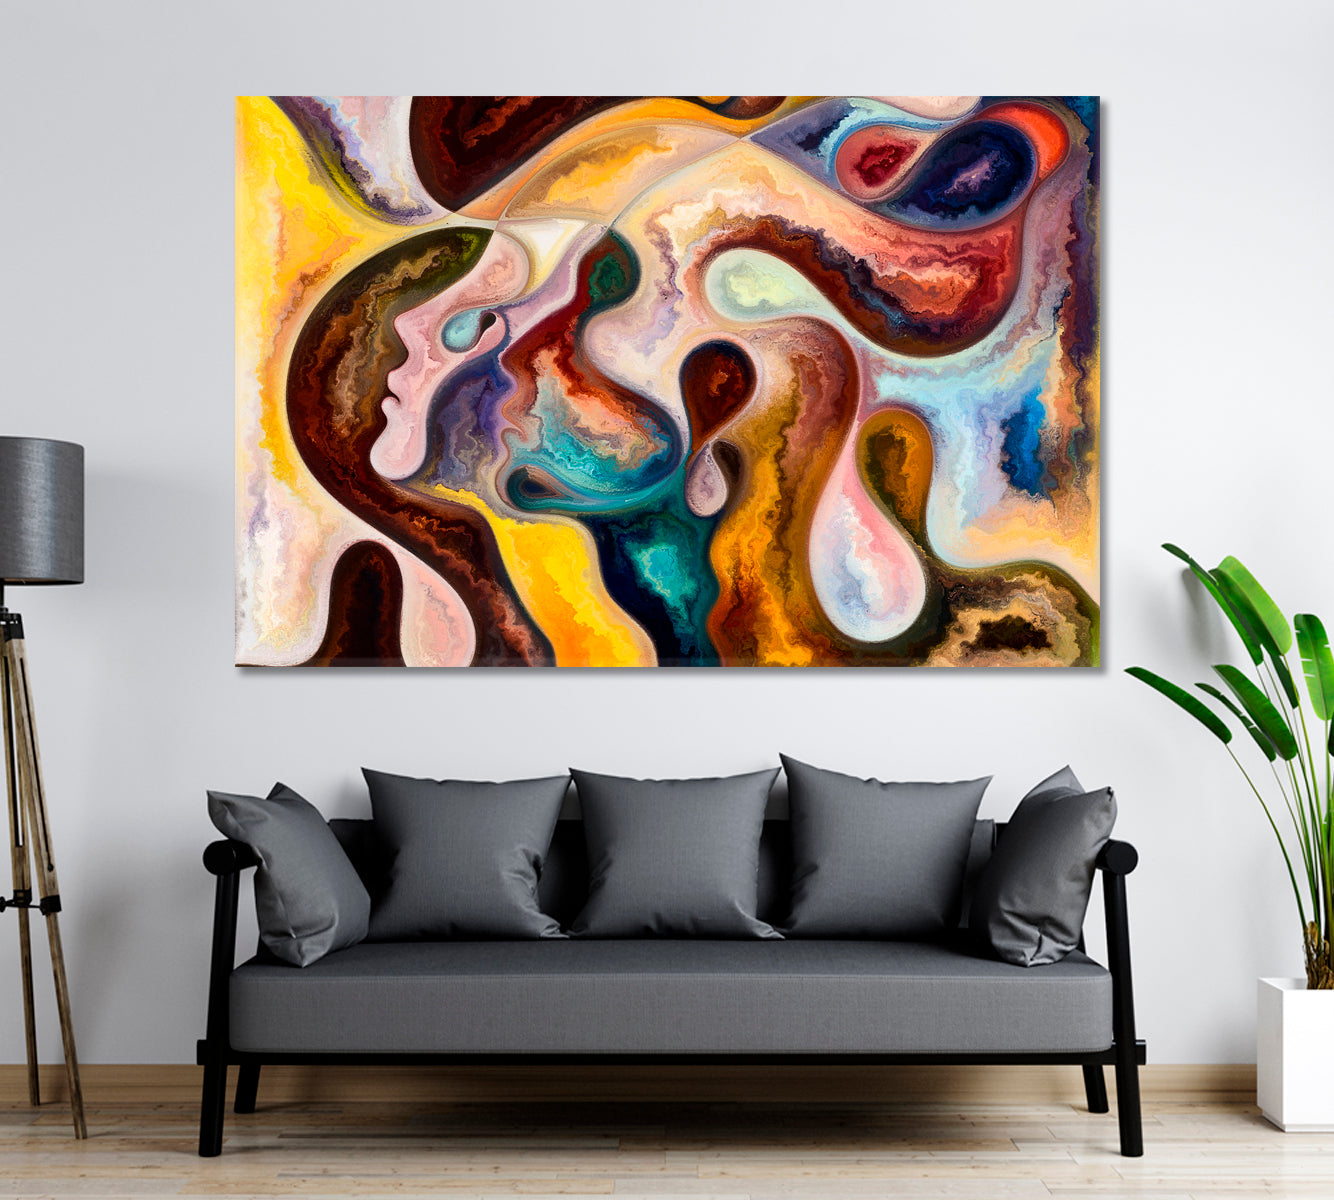 Abstract Shapes Vivid Dreams Painting Consciousness Art Artesty 1 panel 24" x 16" 